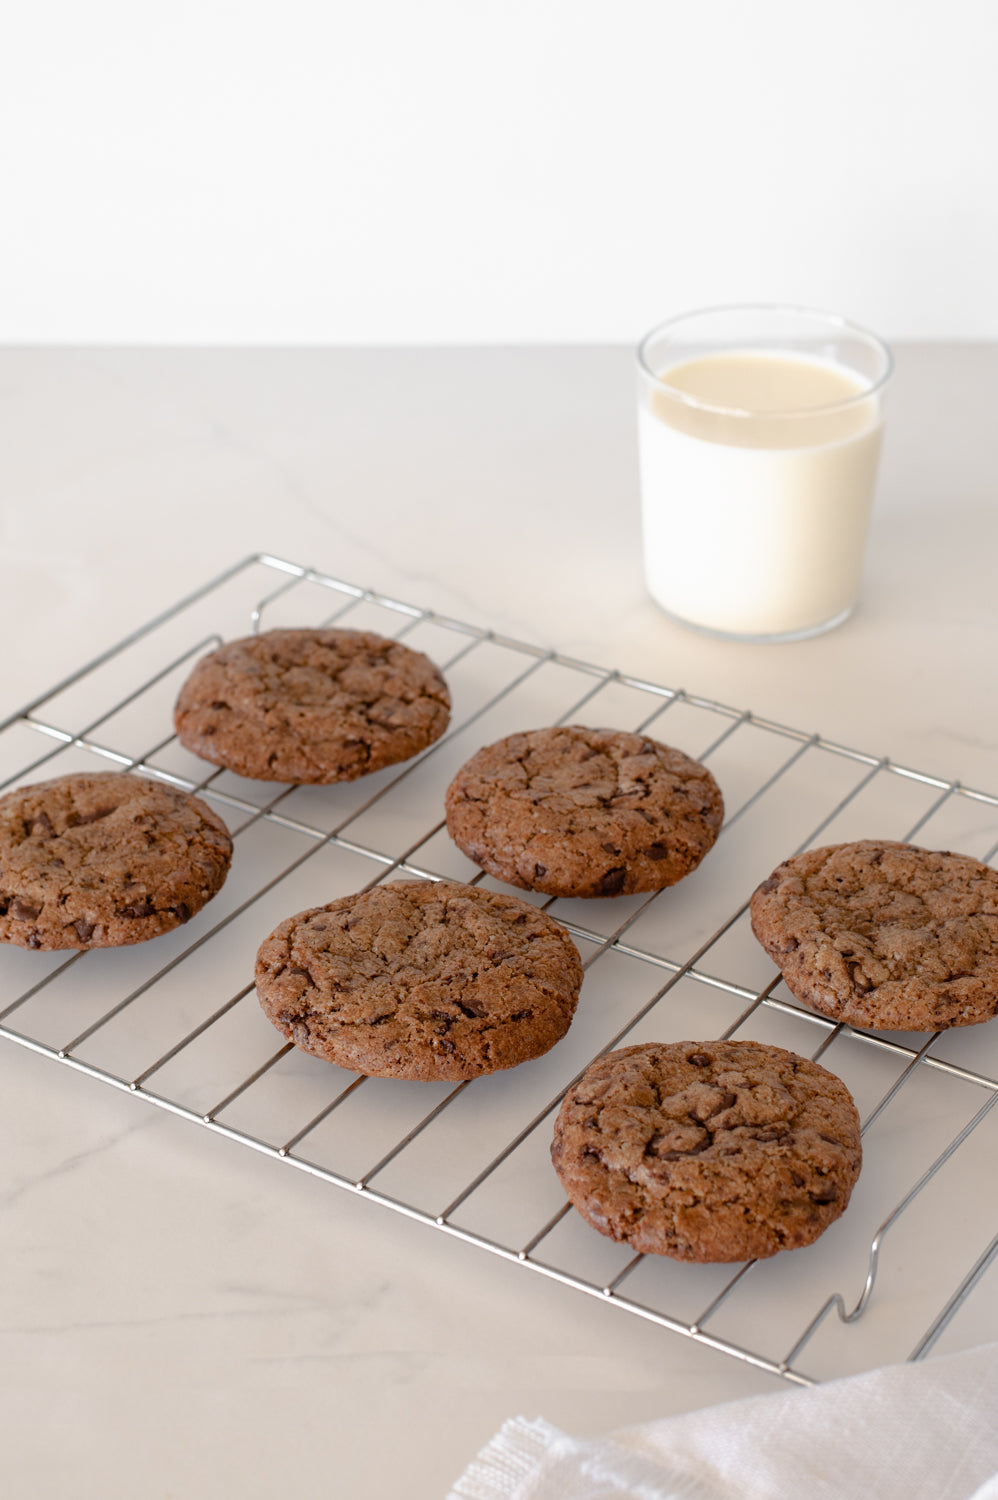 Choc chip cookies on a cooling rack with a glass of milk